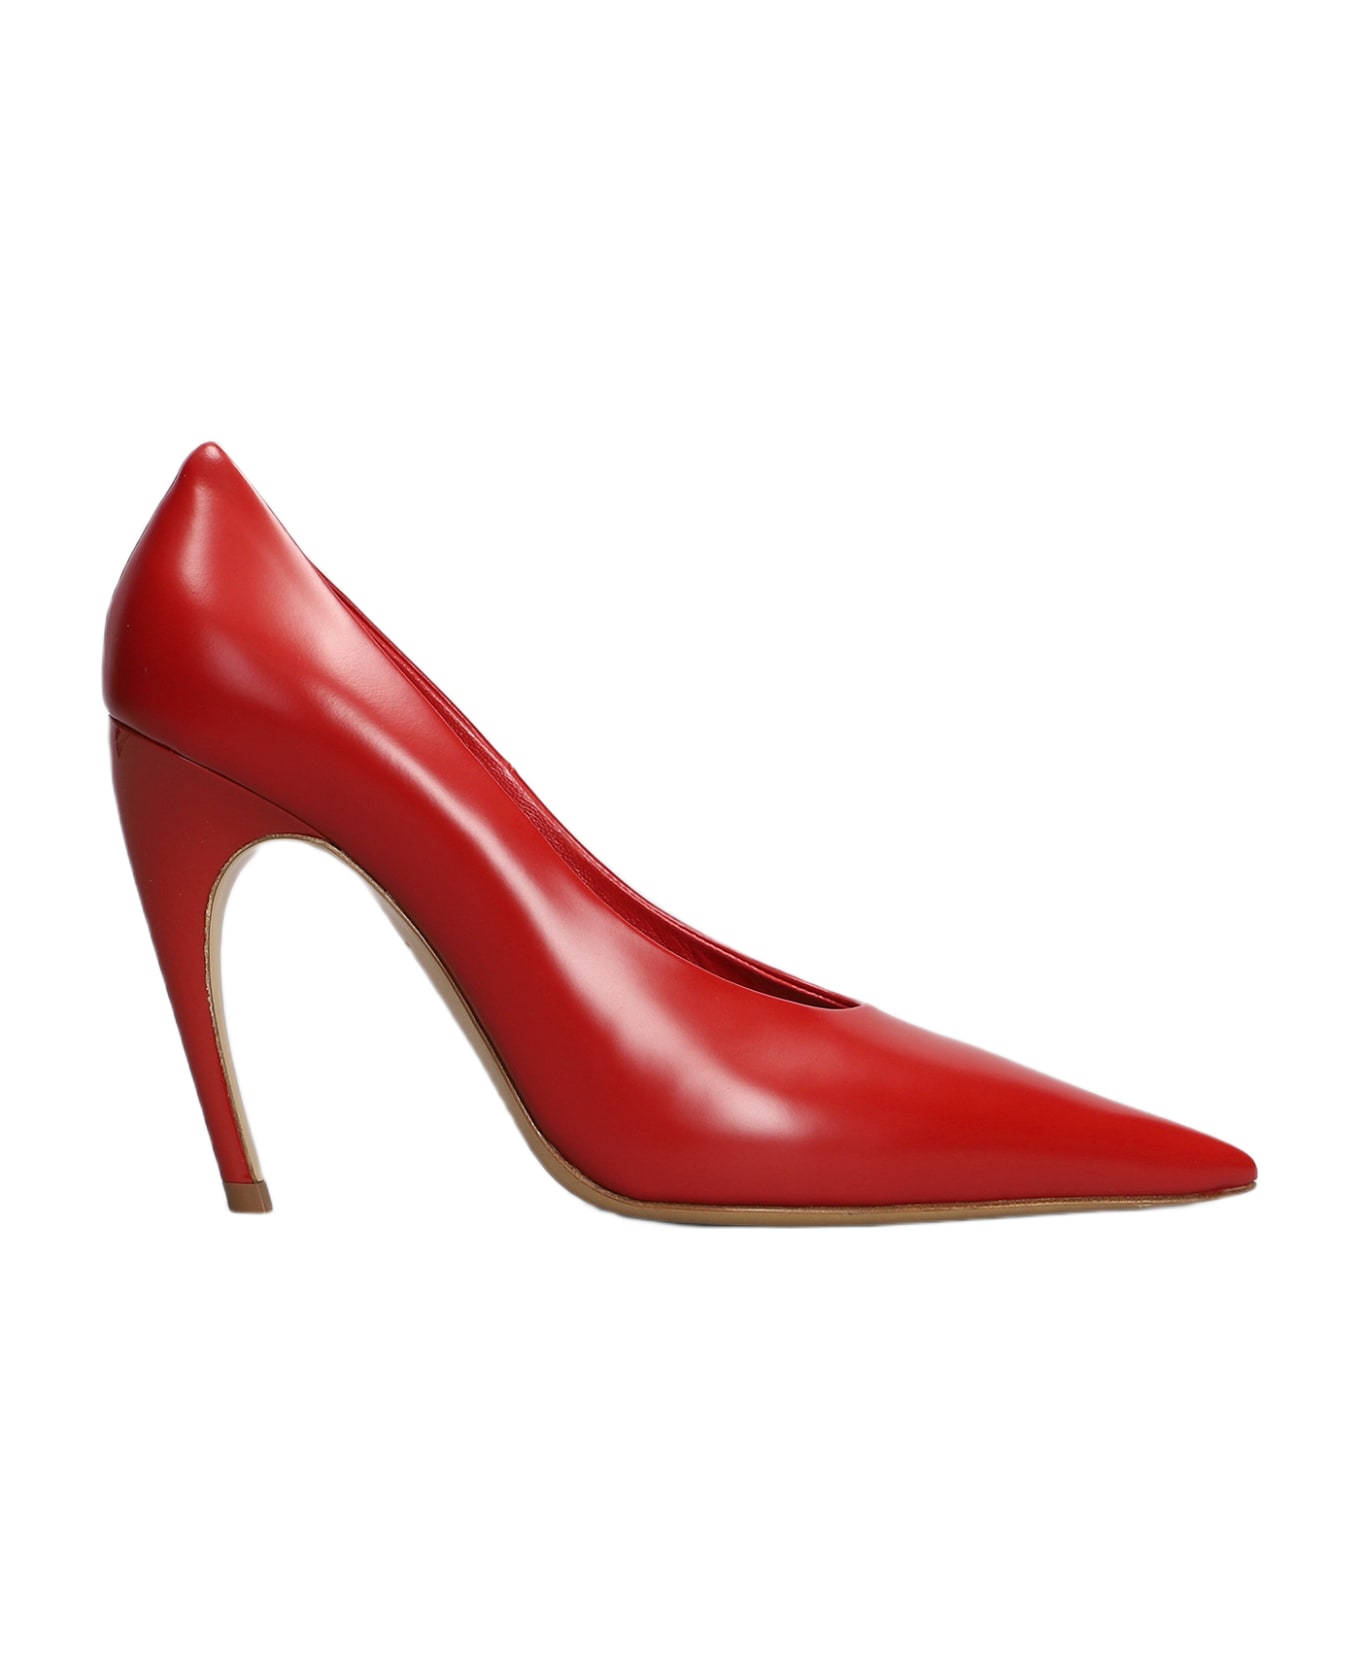 Nensi Dojaka Pumps In Red Leather - red